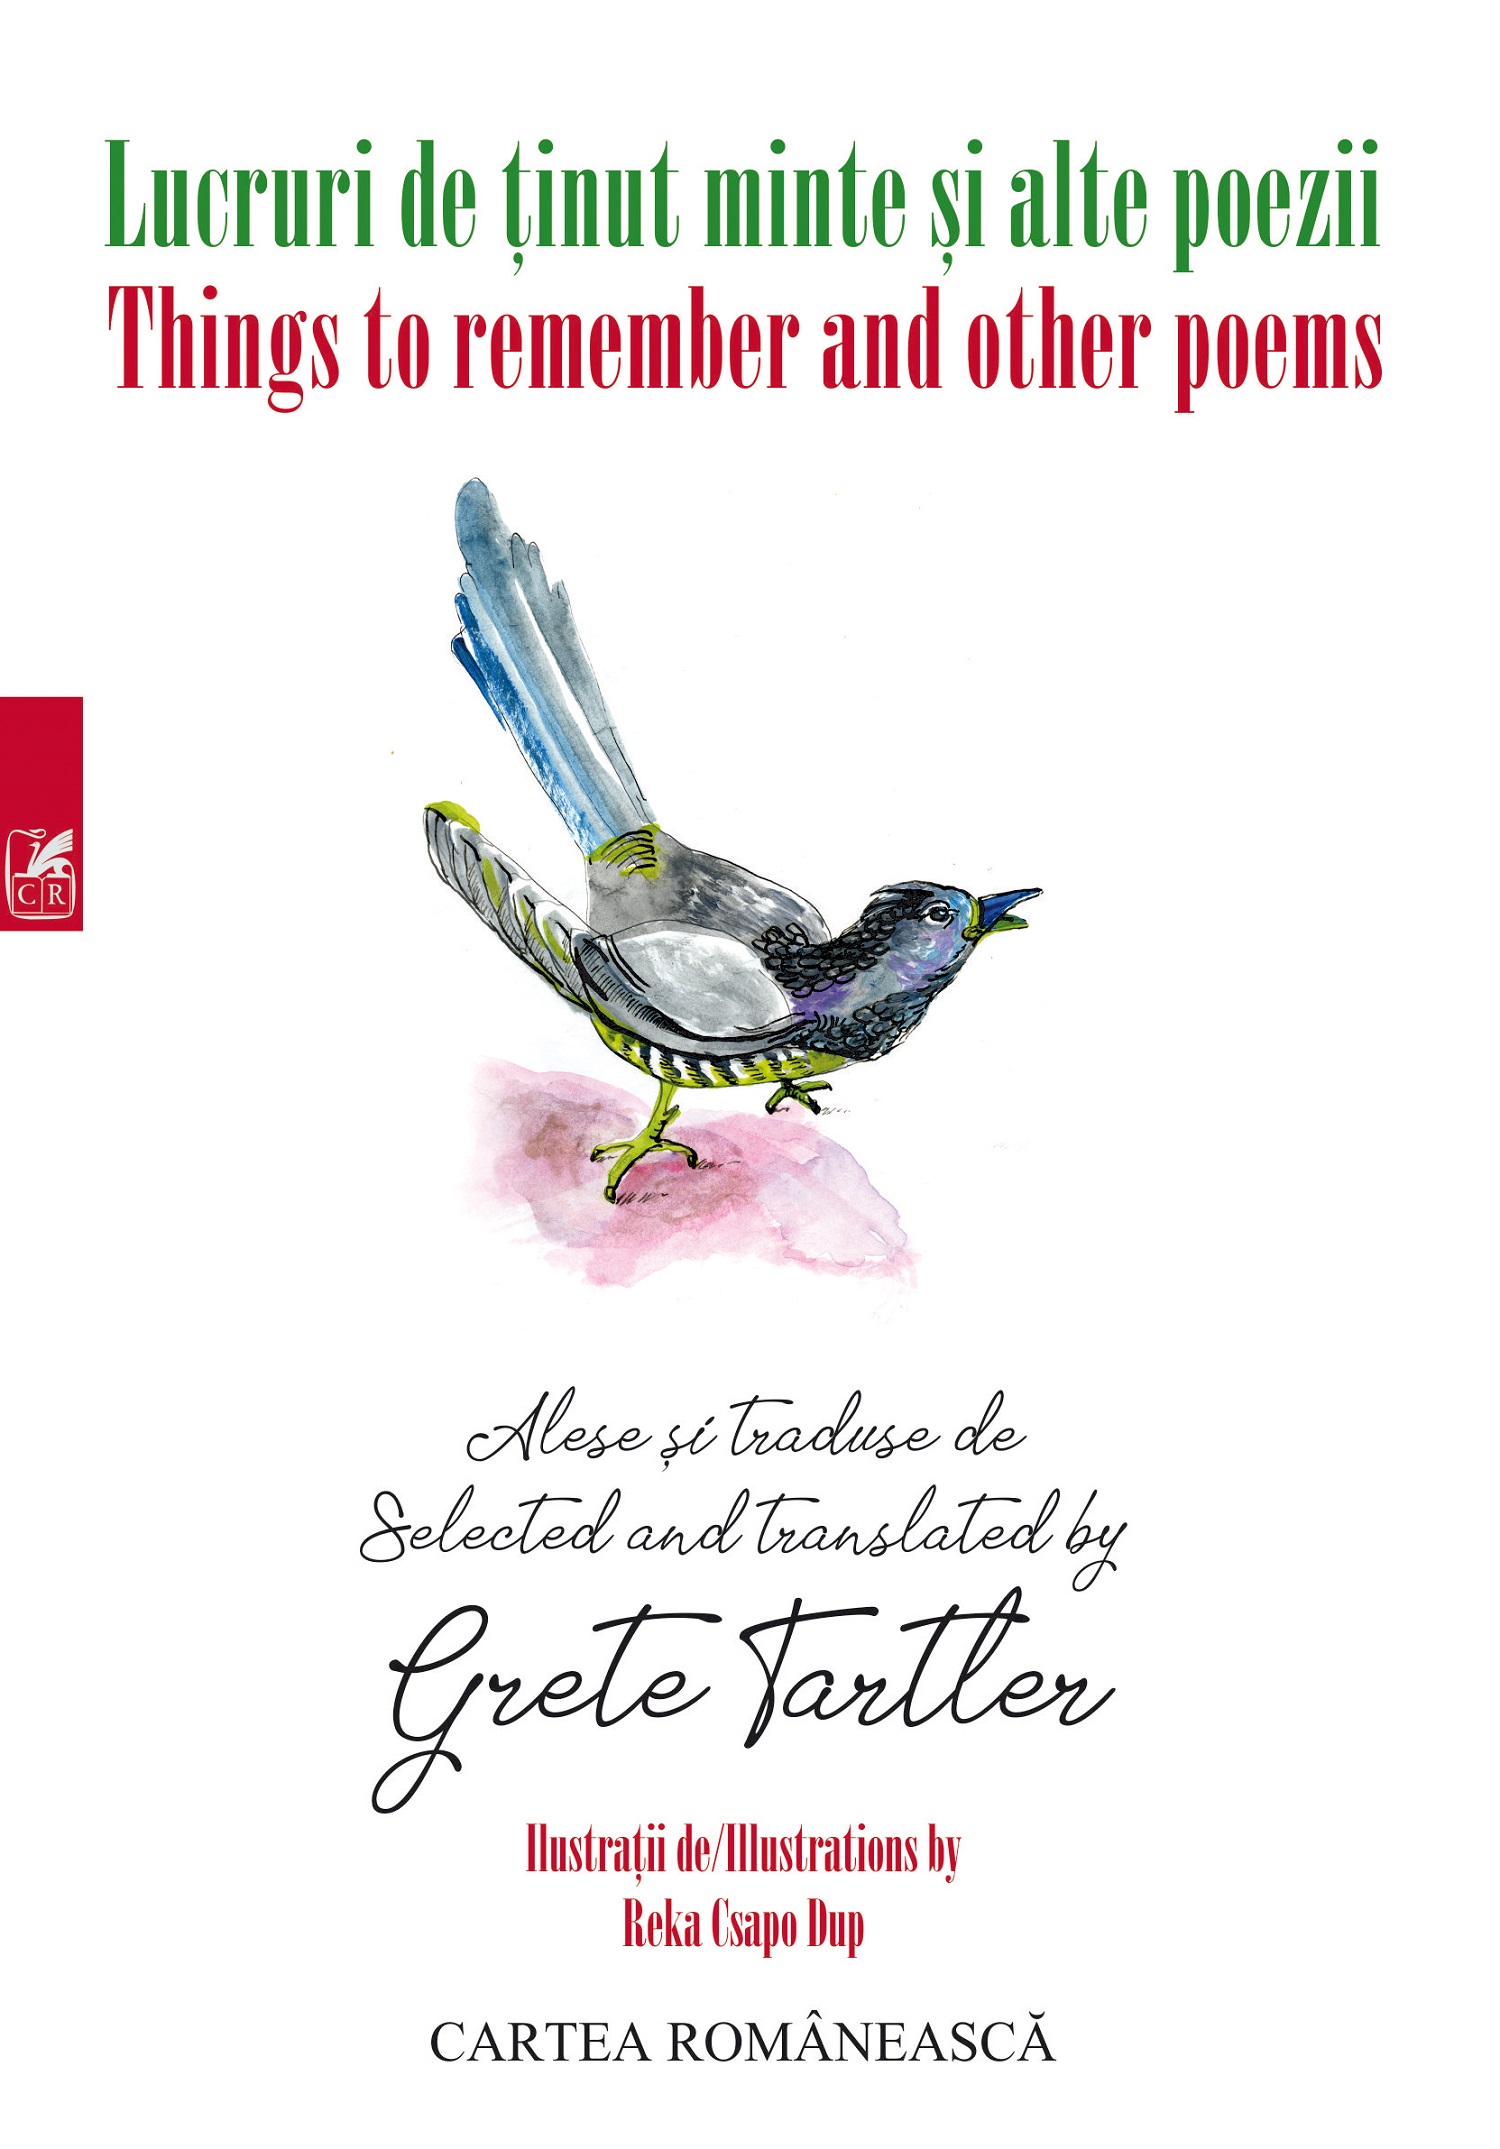 Lucruri de tinut minte si alte poeme / Things to remember and other poems | Grete Tartler Cartea Romaneasca educational poza bestsellers.ro